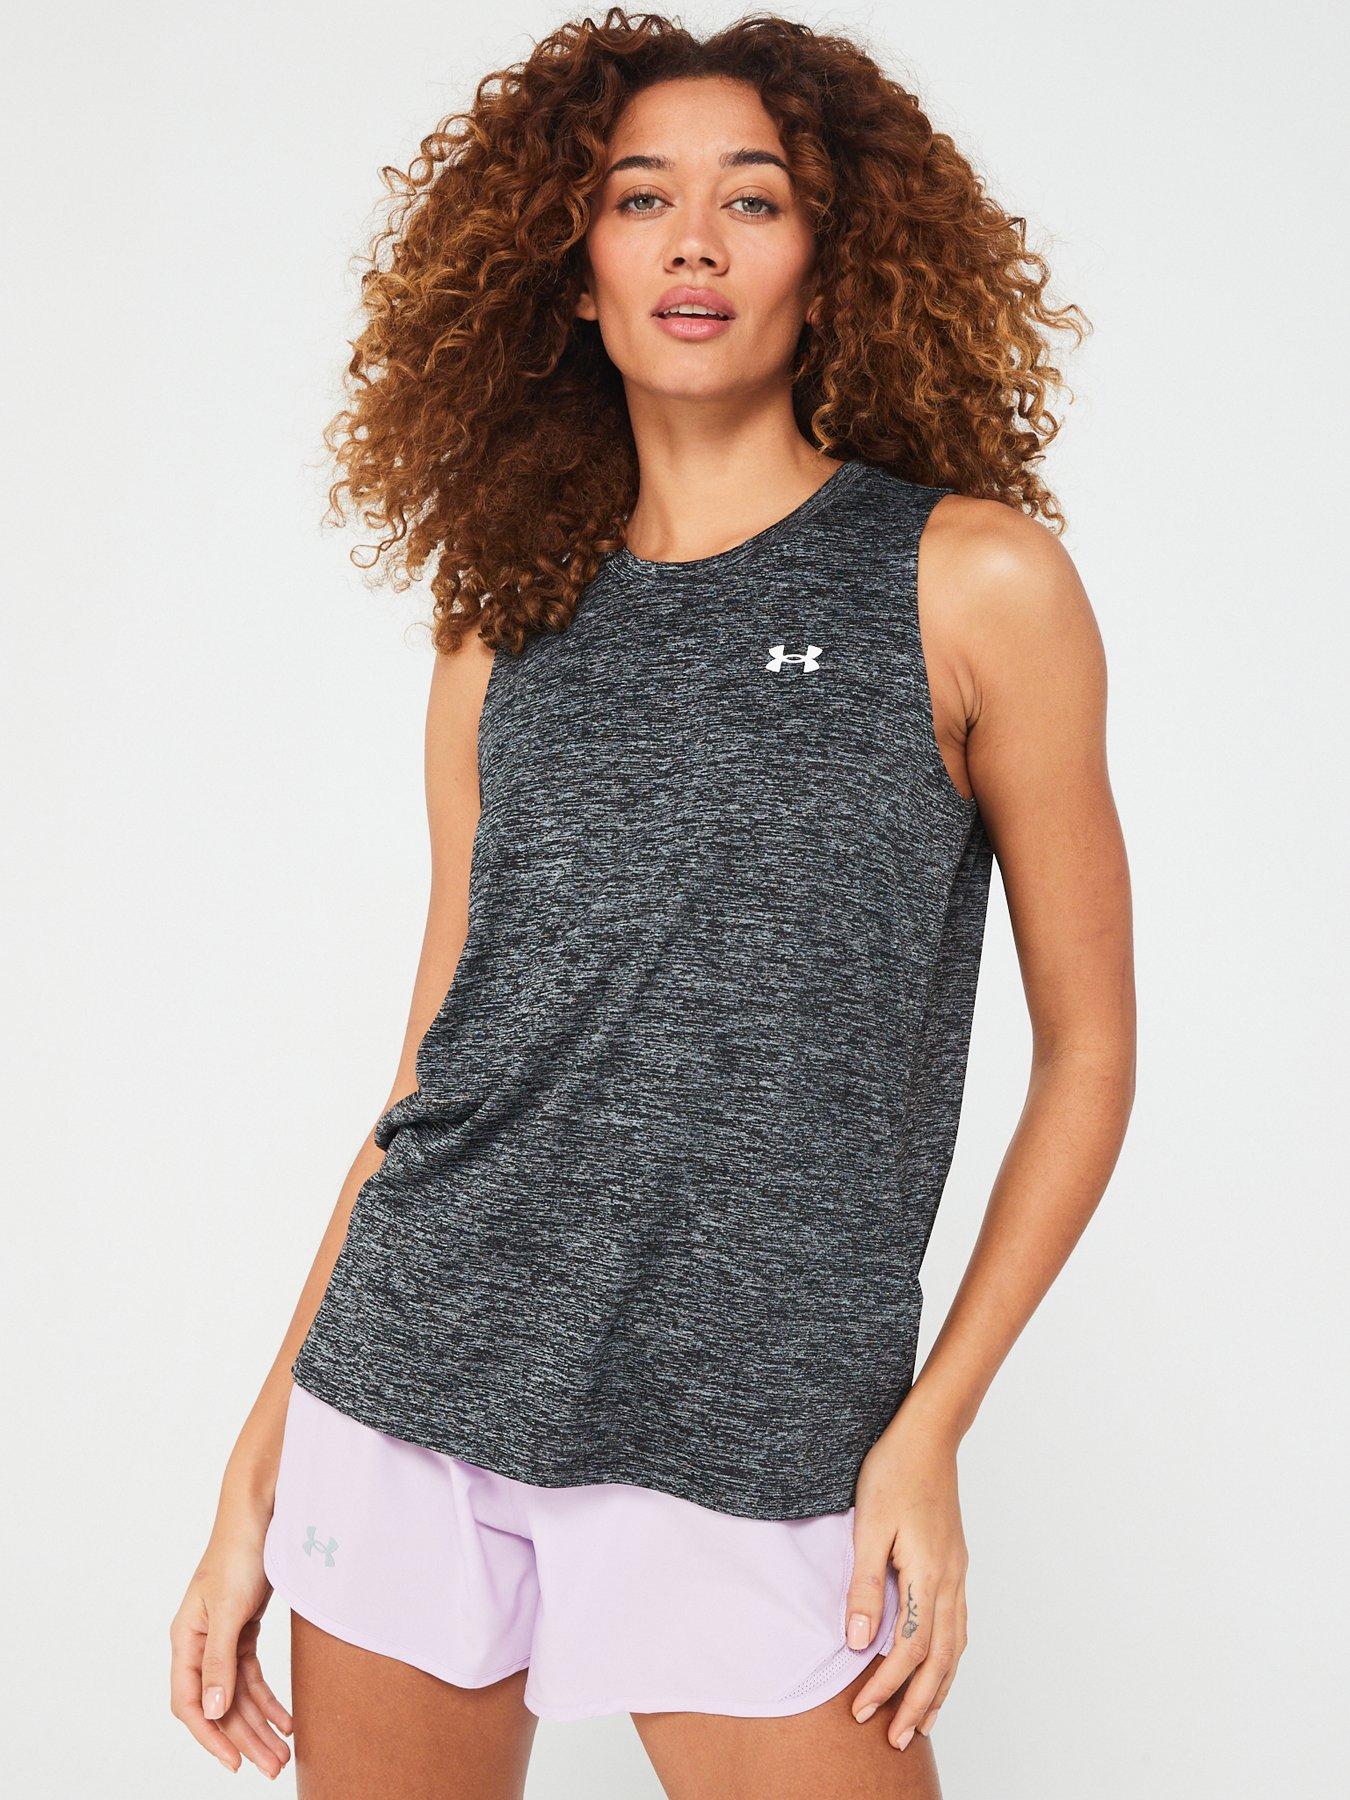 Under armour, Vests, Womens sports clothing